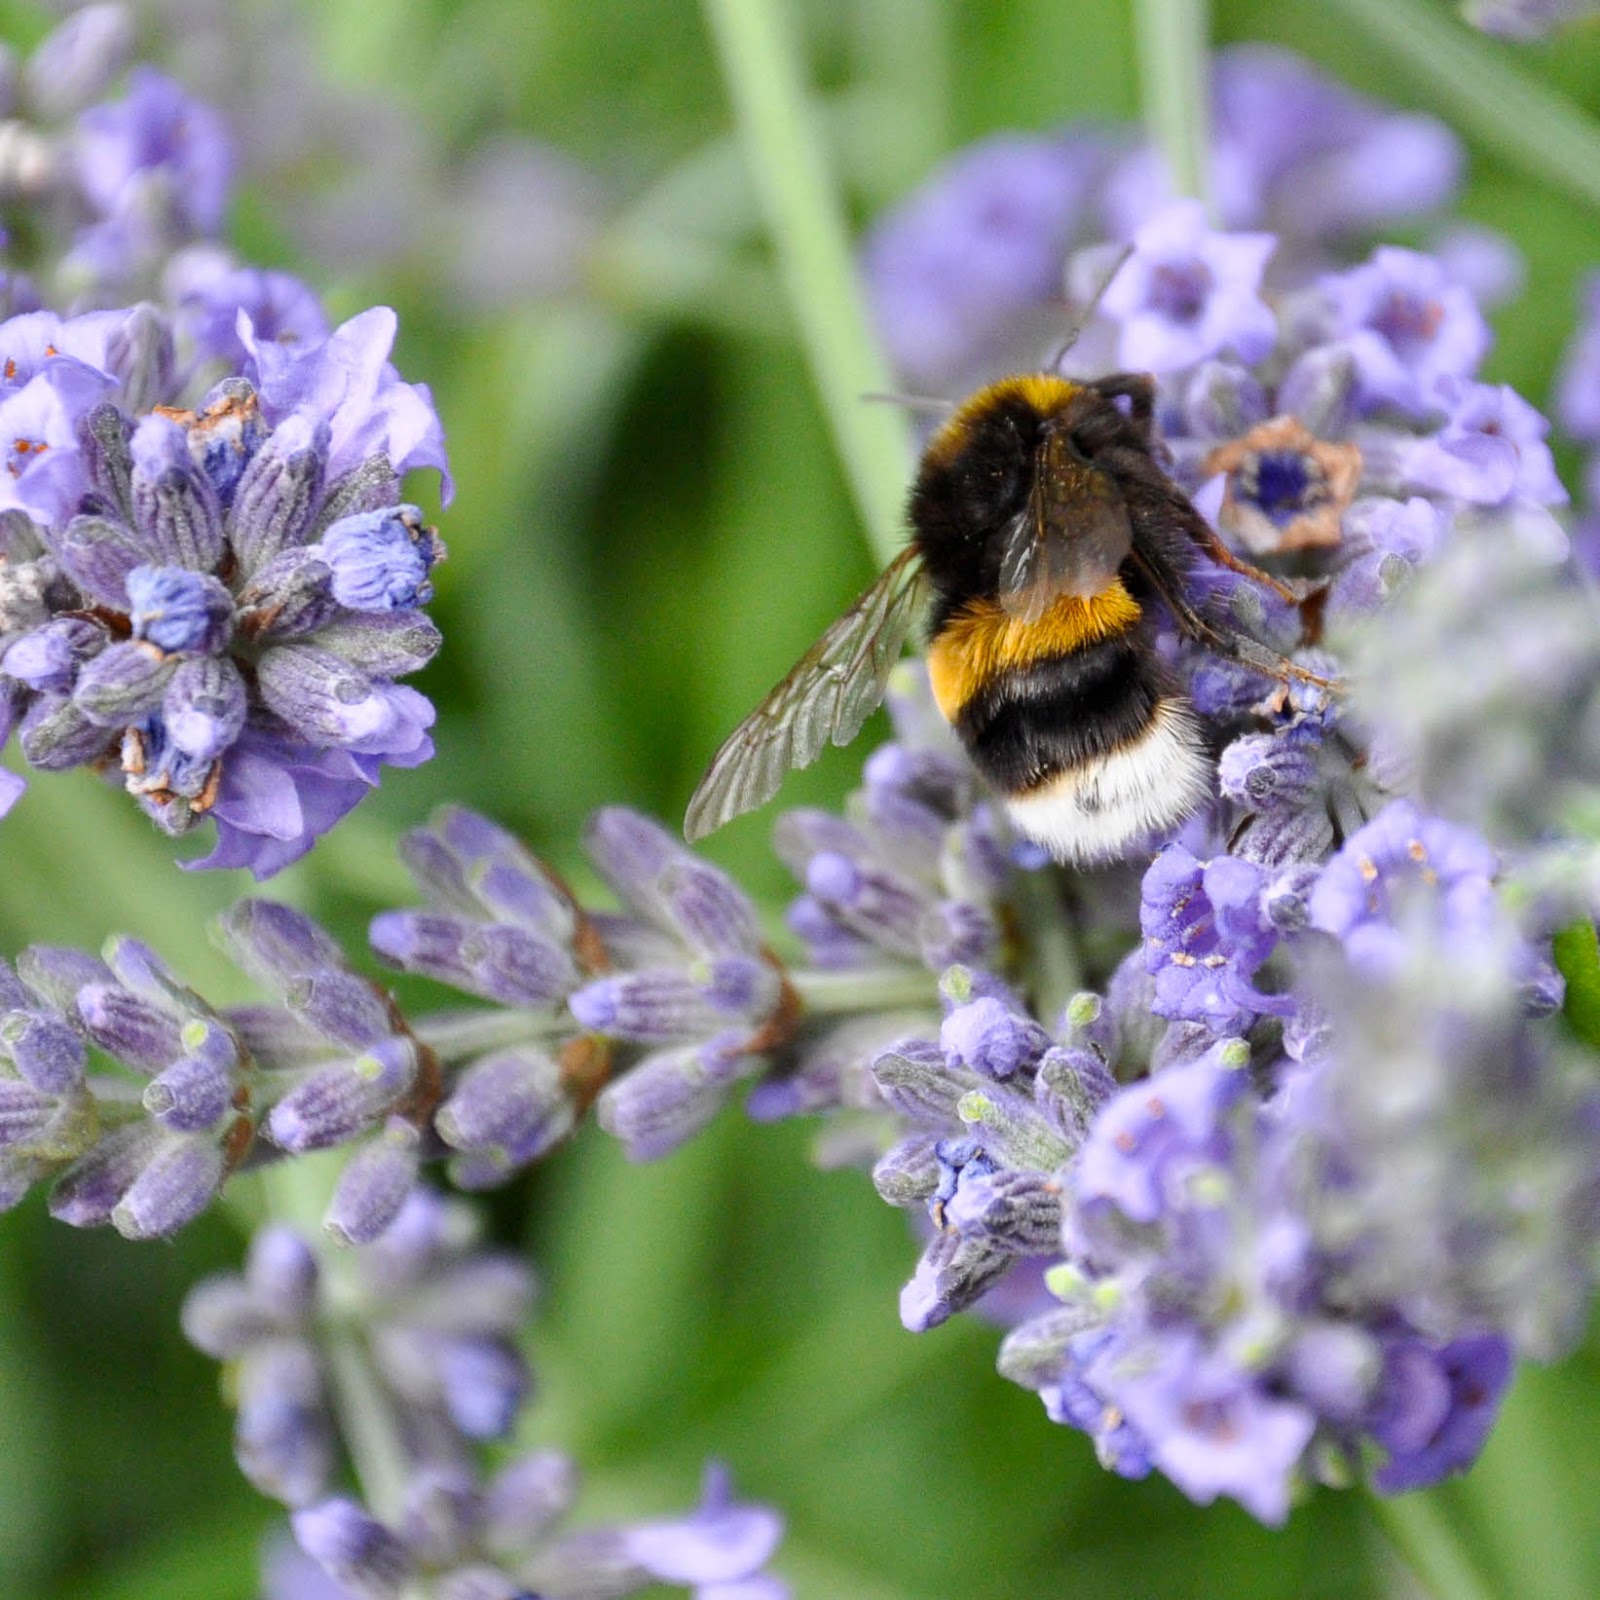 A bee on a lavender branch in the garden of St. Albans Cathedral, St. Albans, Herts, England